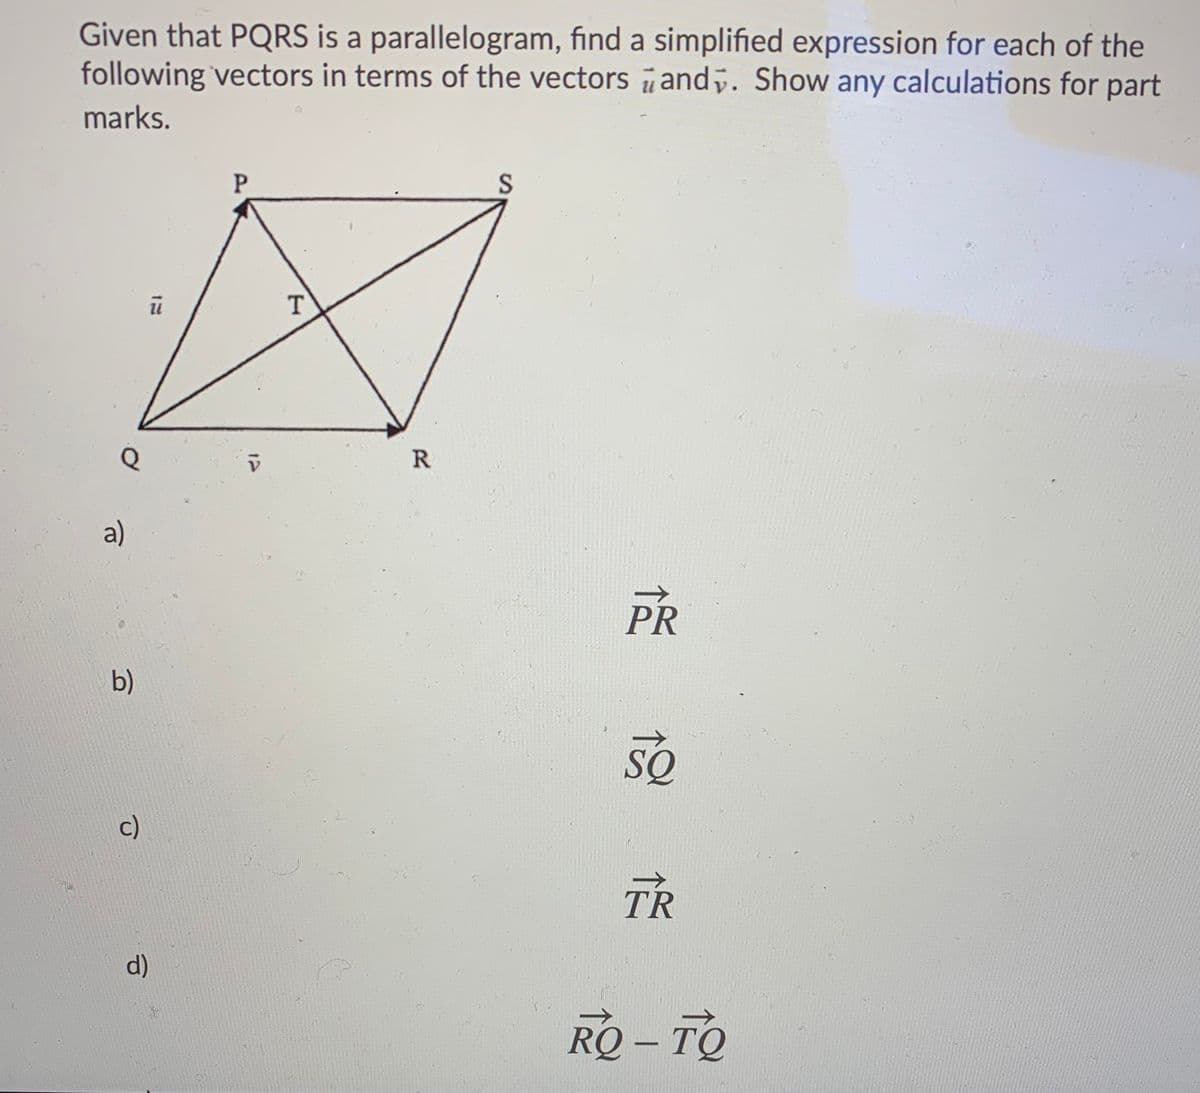 Given that PQRS is a parallelogram, find a simplified expression for each of the
following vectors in terms of the vectors and. Show any calculations for part
marks.
T
R
a)
PR
b)
SQ
c)
TR
d)
RQ – TO
P.
